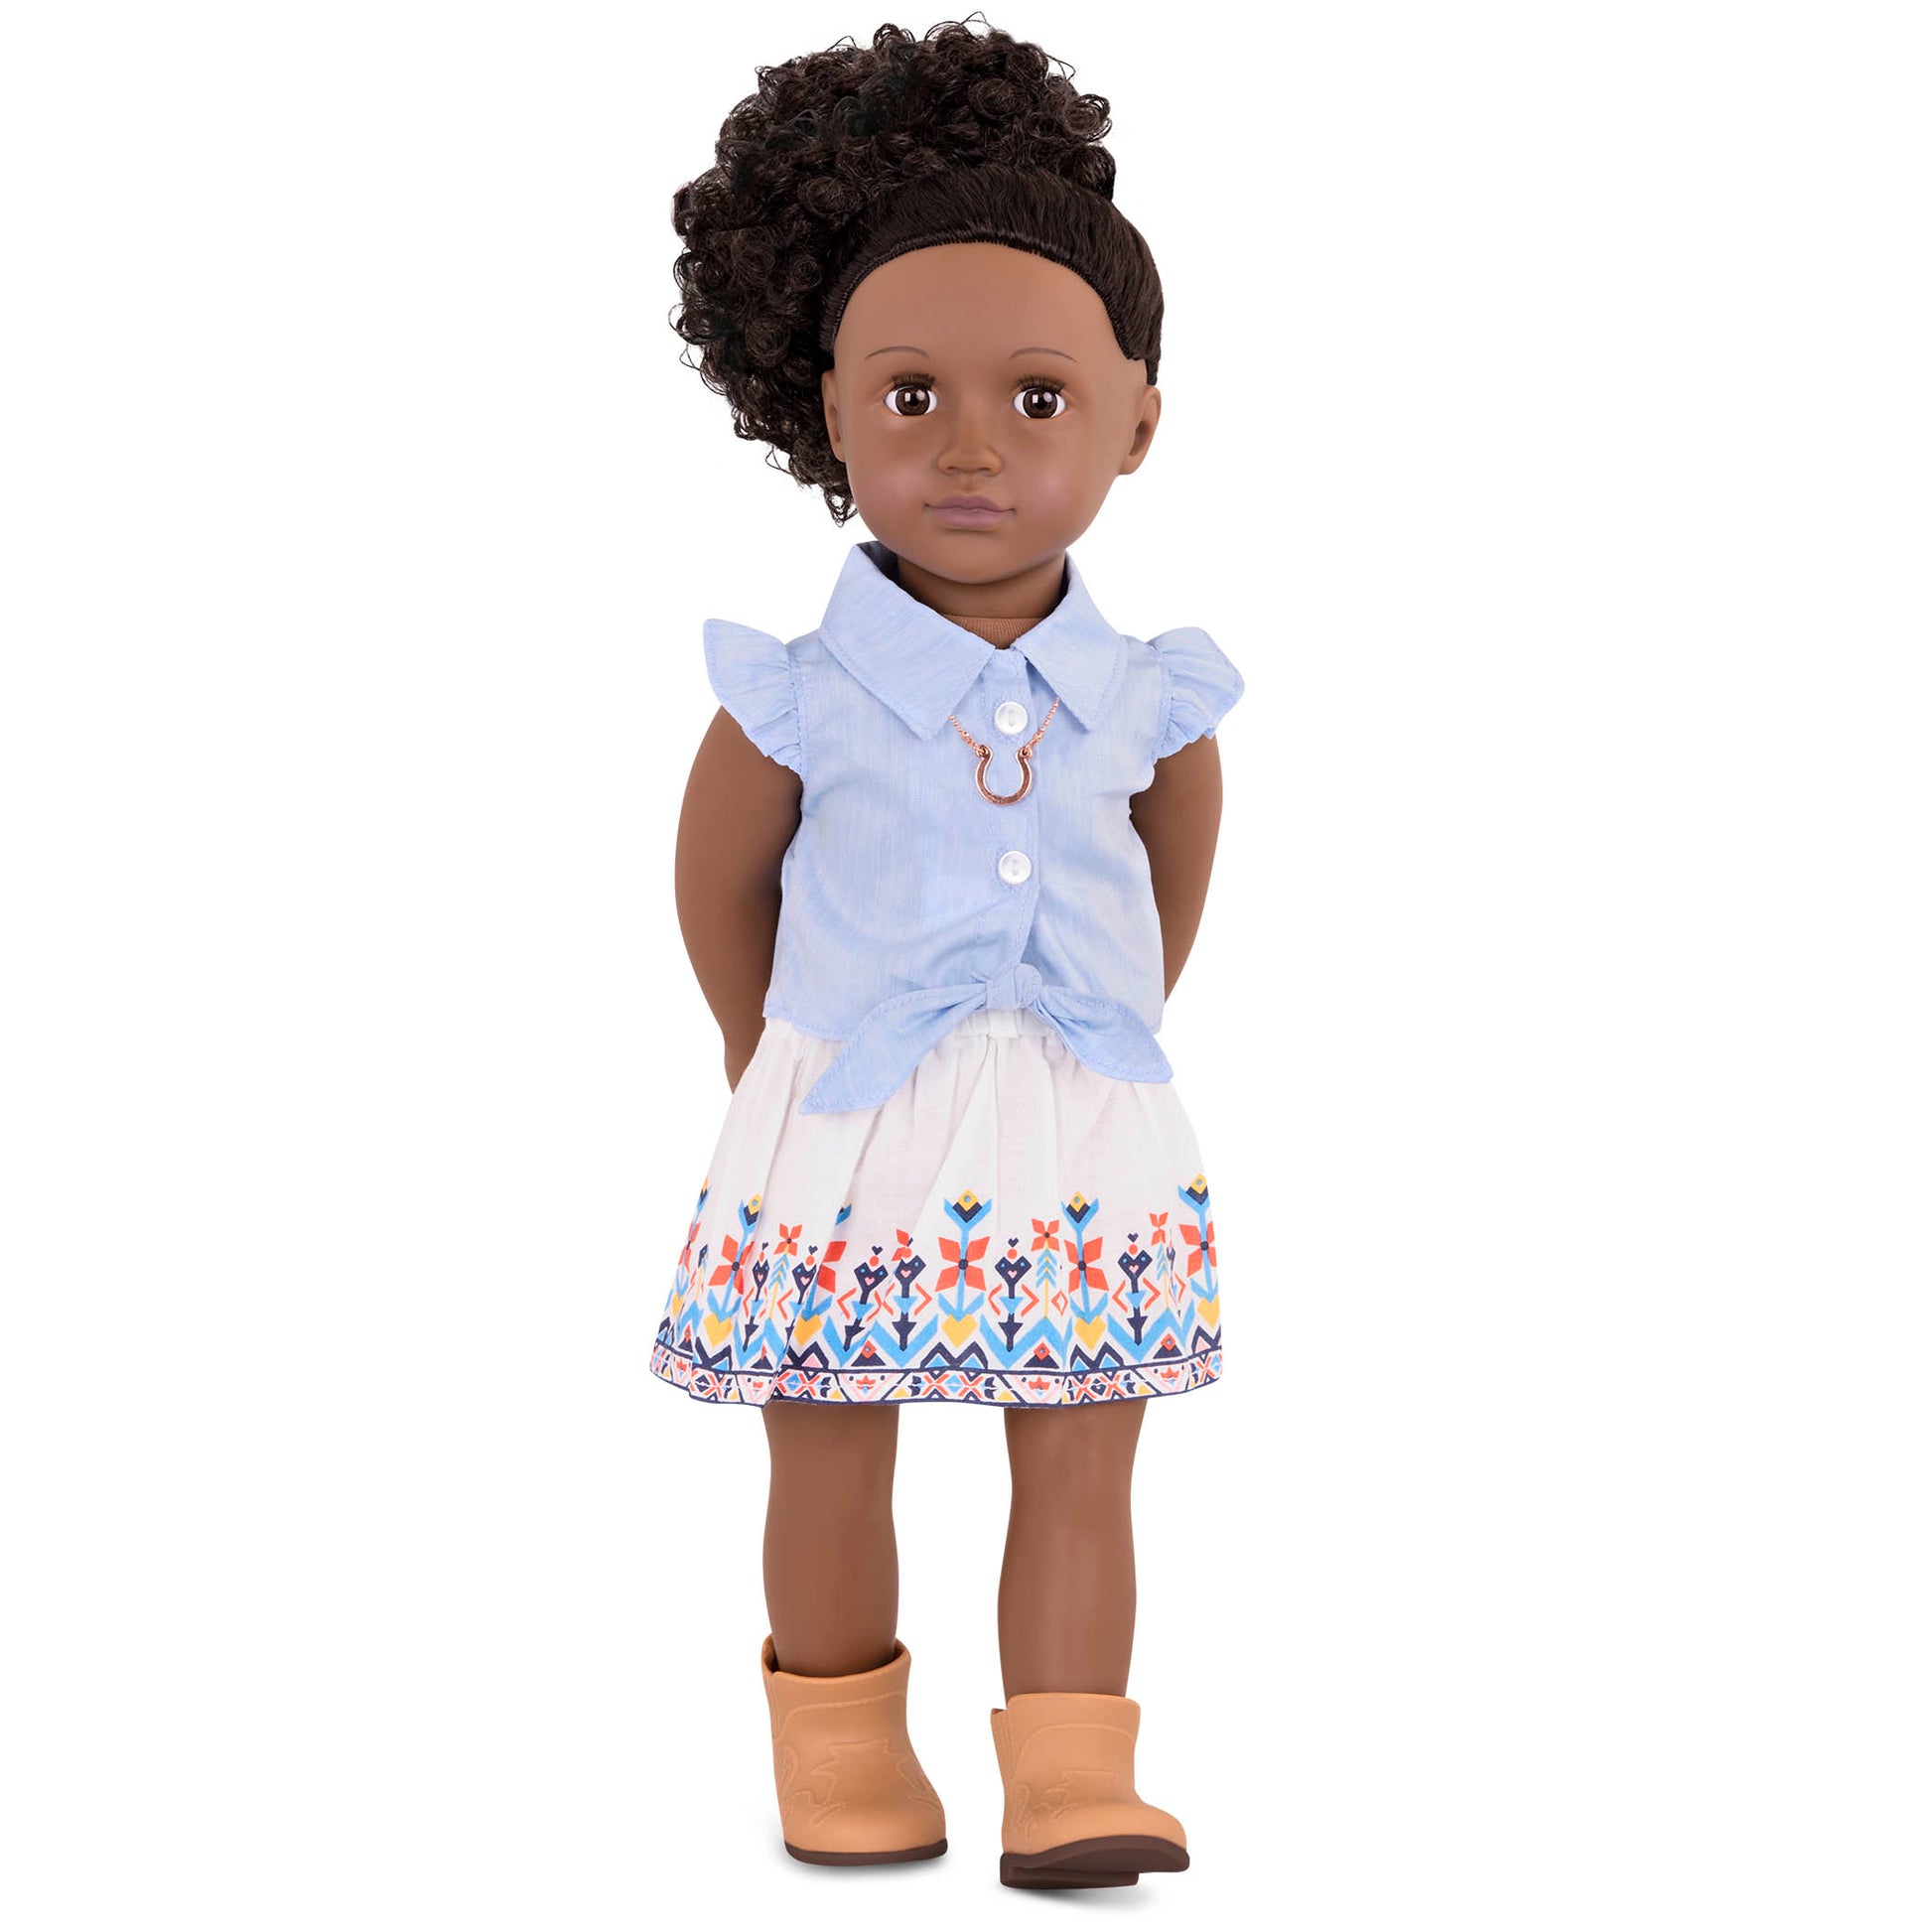 Our Generation Regular Outfit - My Lucky Horseshoe is an amazing doll accessory for creative play for young girls The Toy Wagon